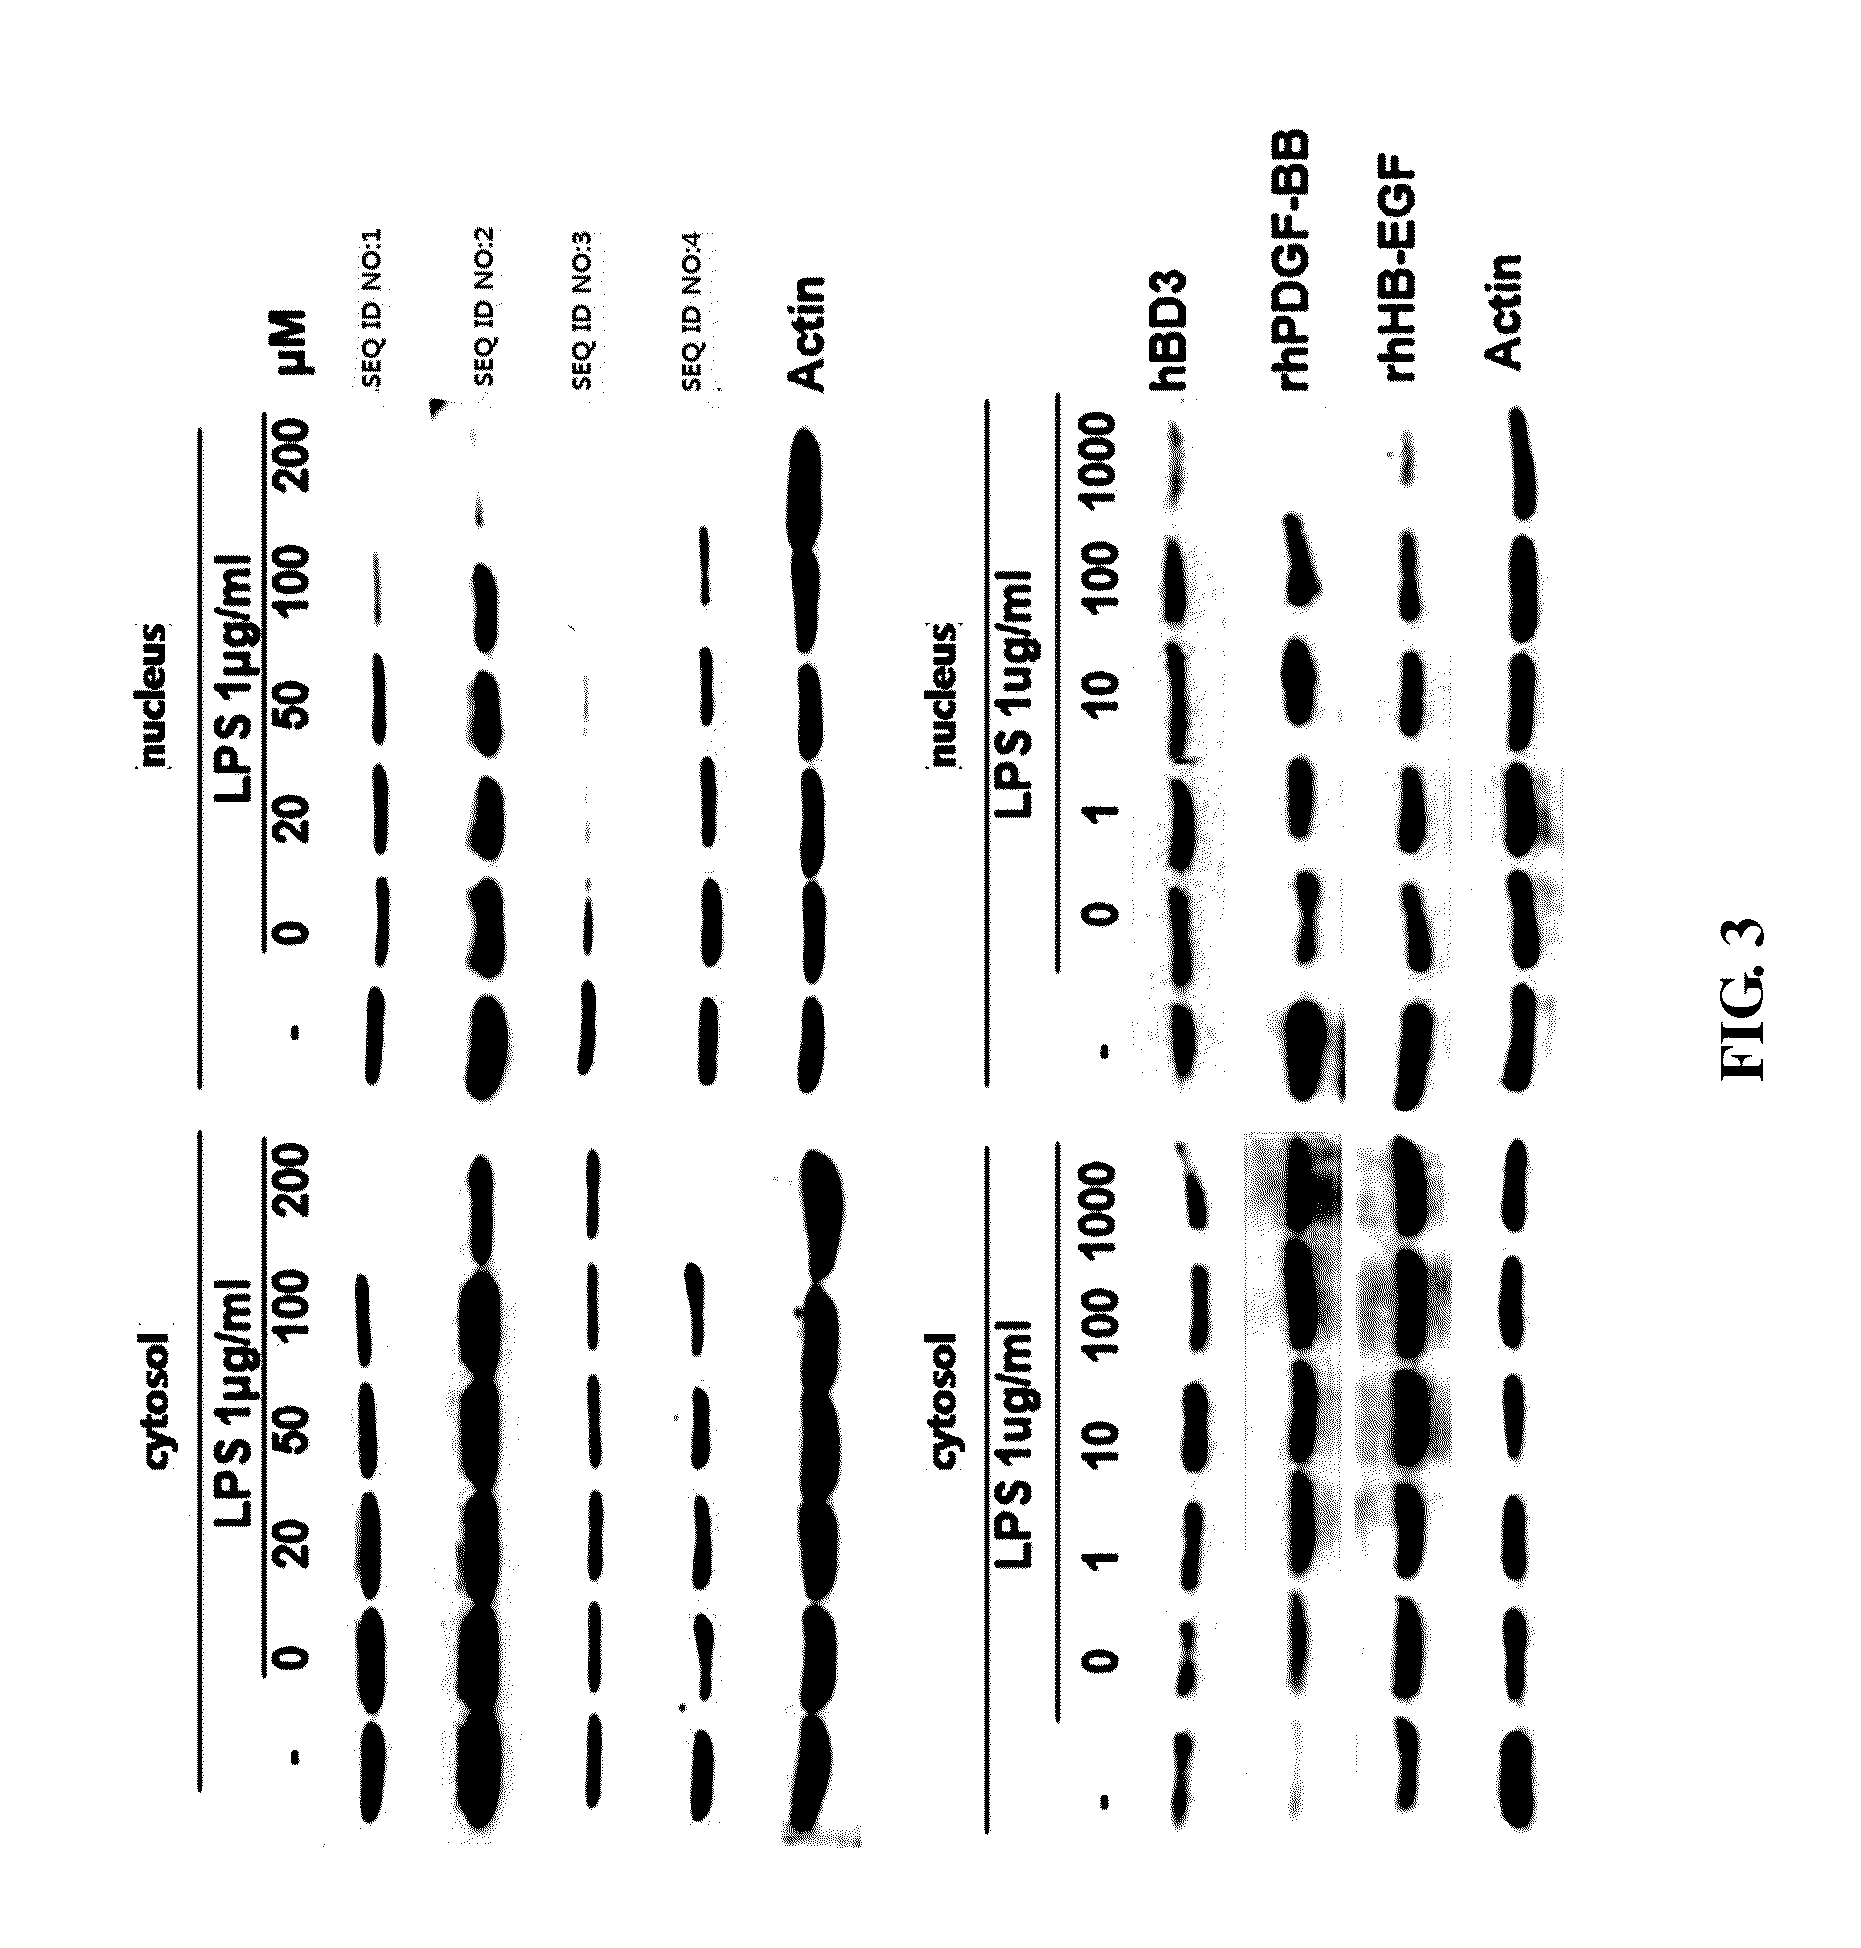 Peptide having antimicrobial or Anti-inflammatory activity and pharmaceutical composition containing same as an active ingredient